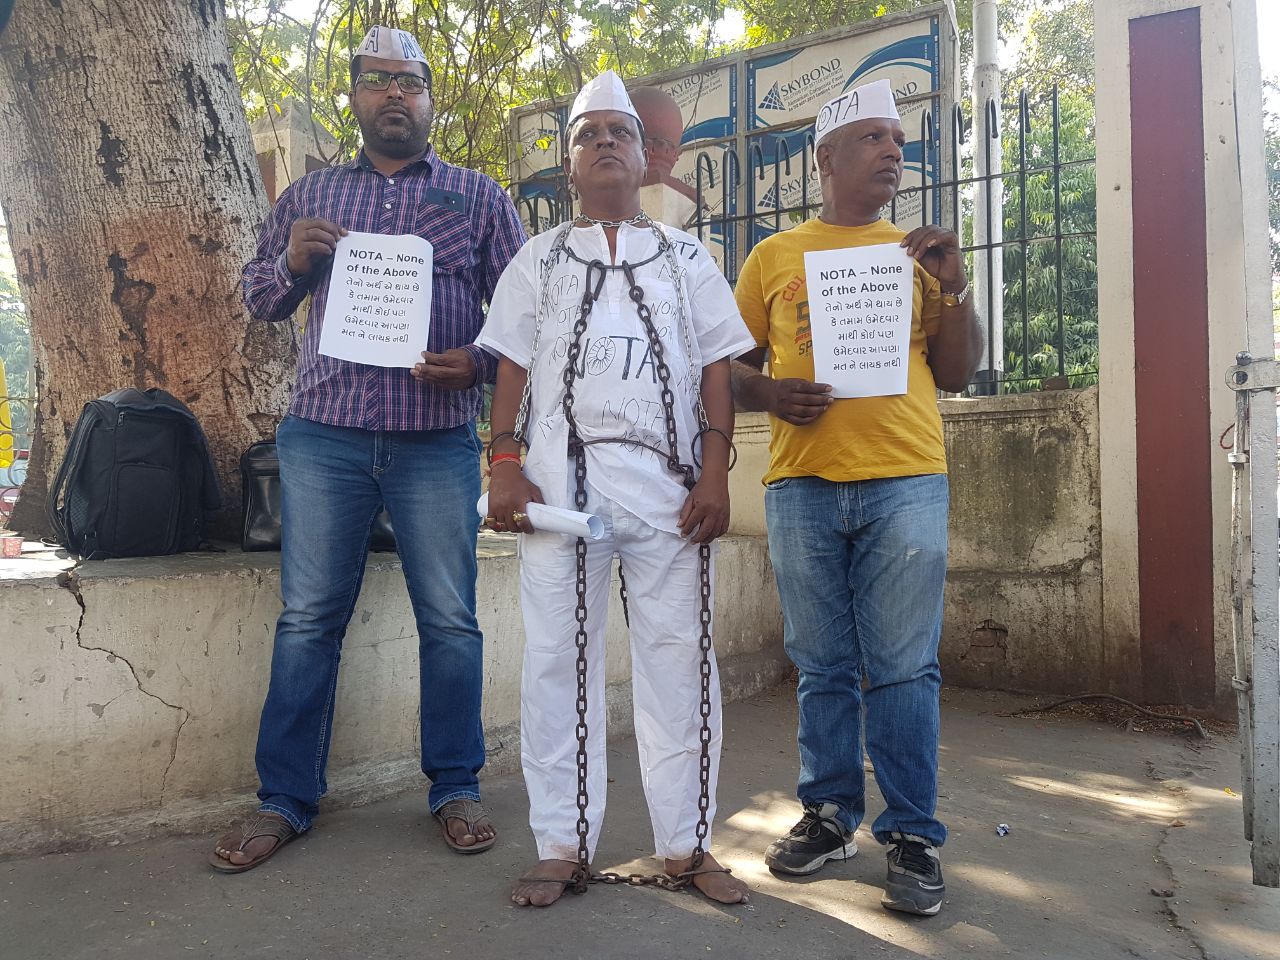 Unique protest for awareness about NOTA